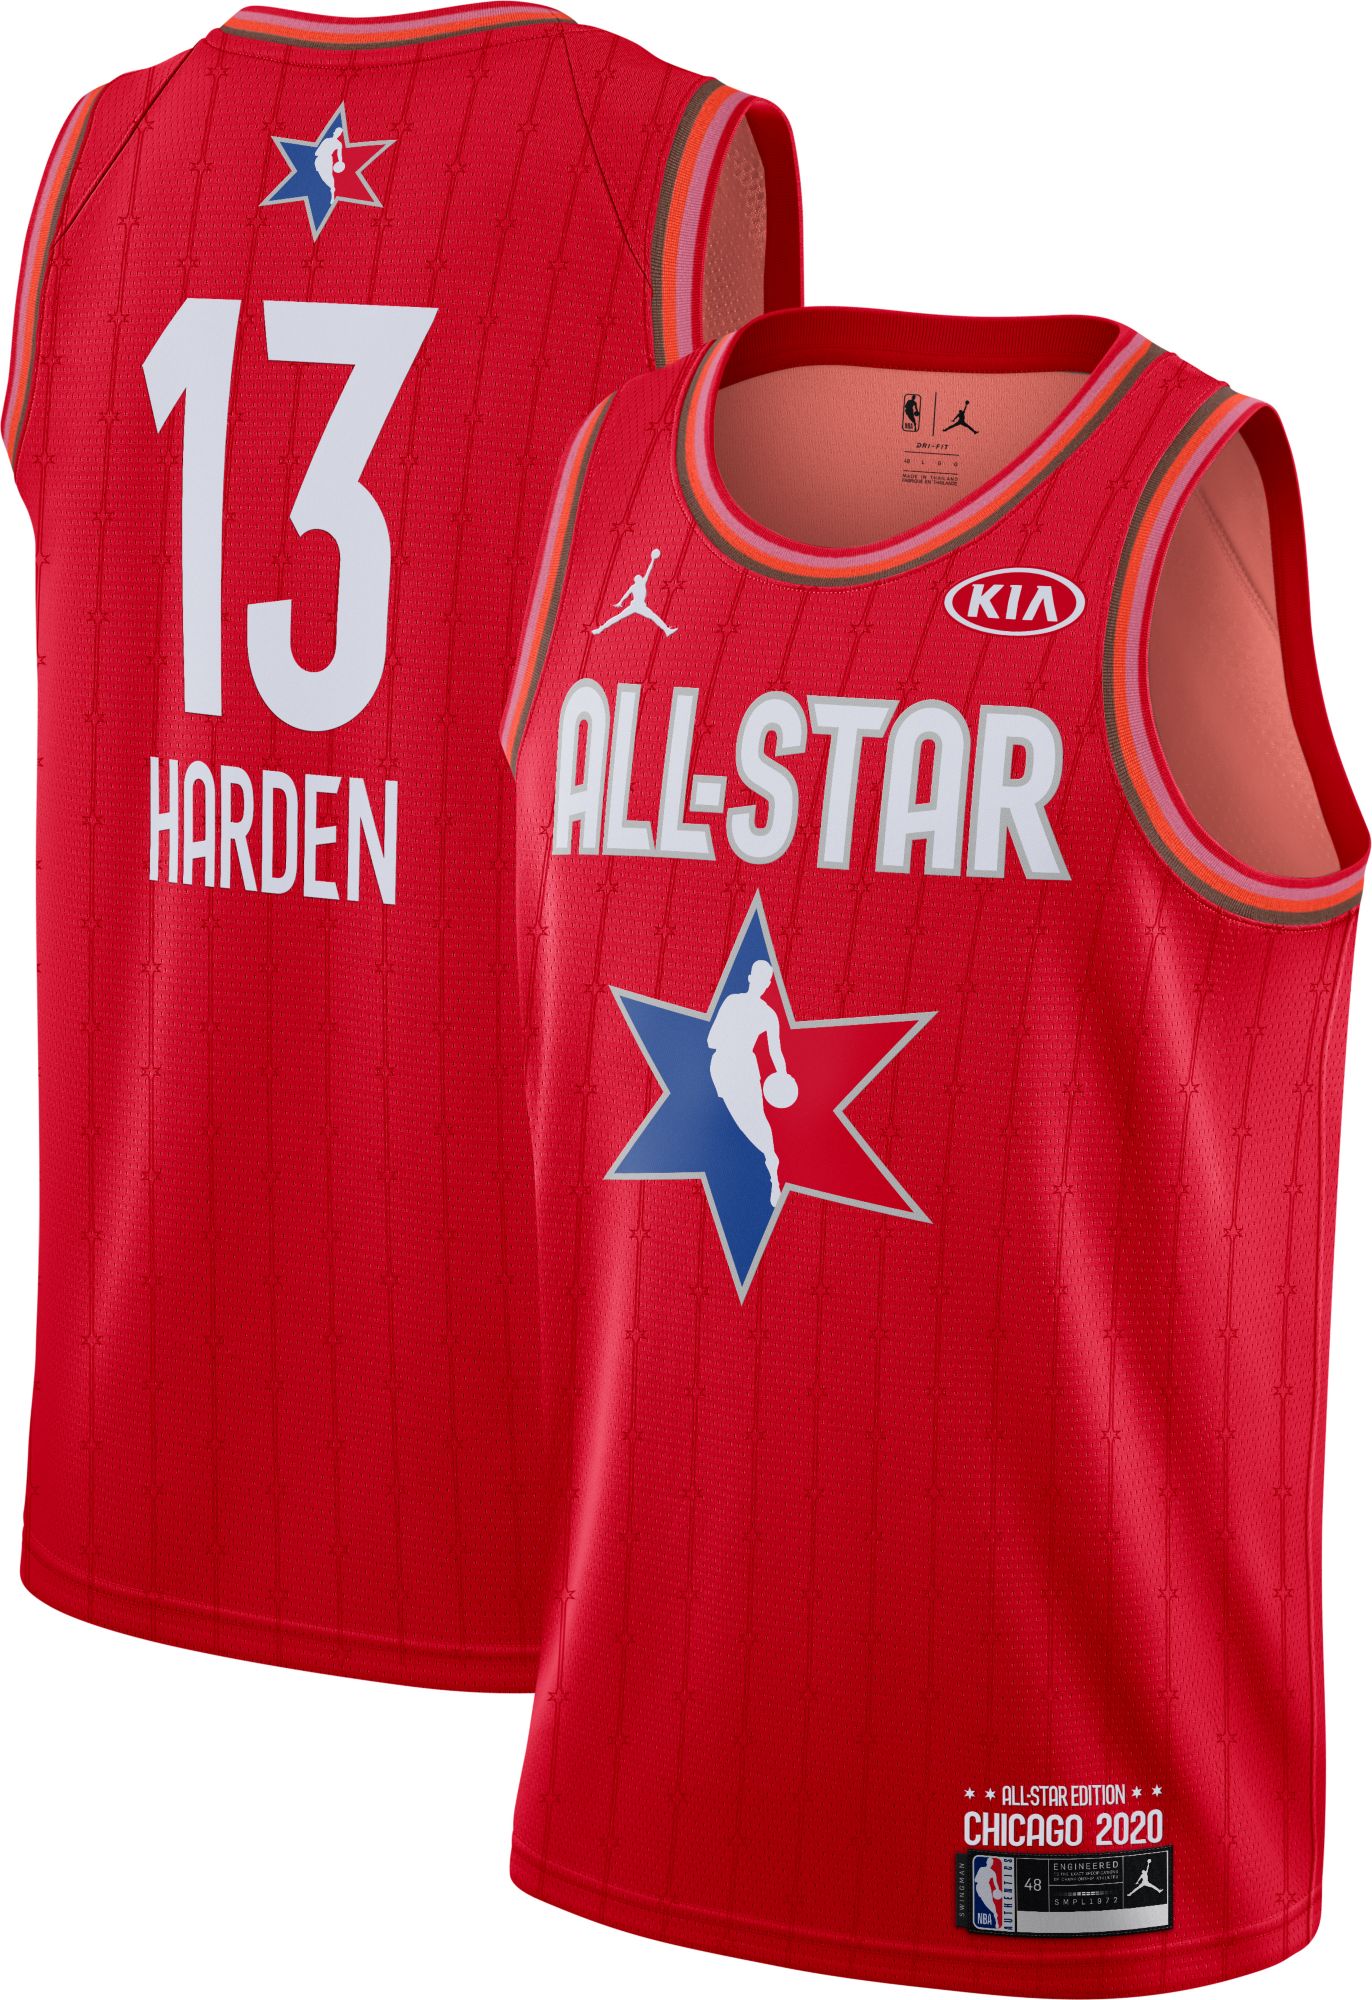 james harden jersey red